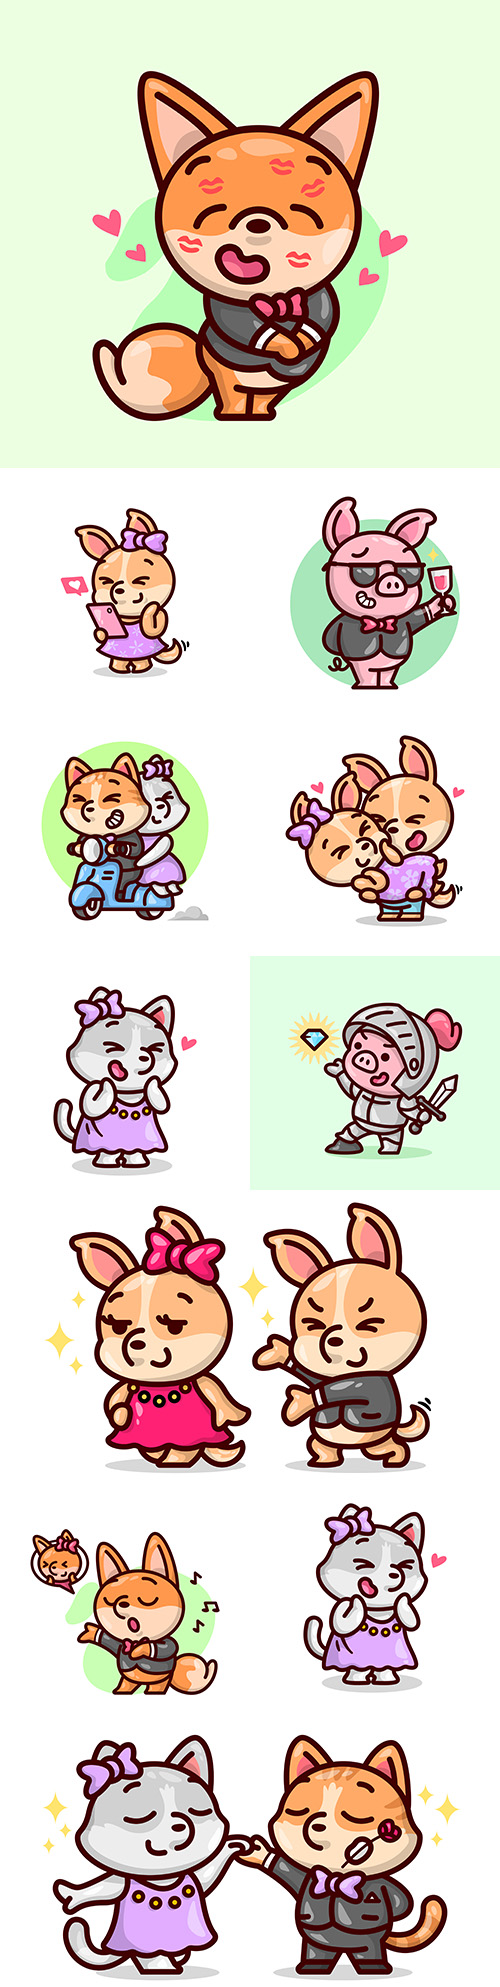 Cute animals in fashionable outfit painted design
